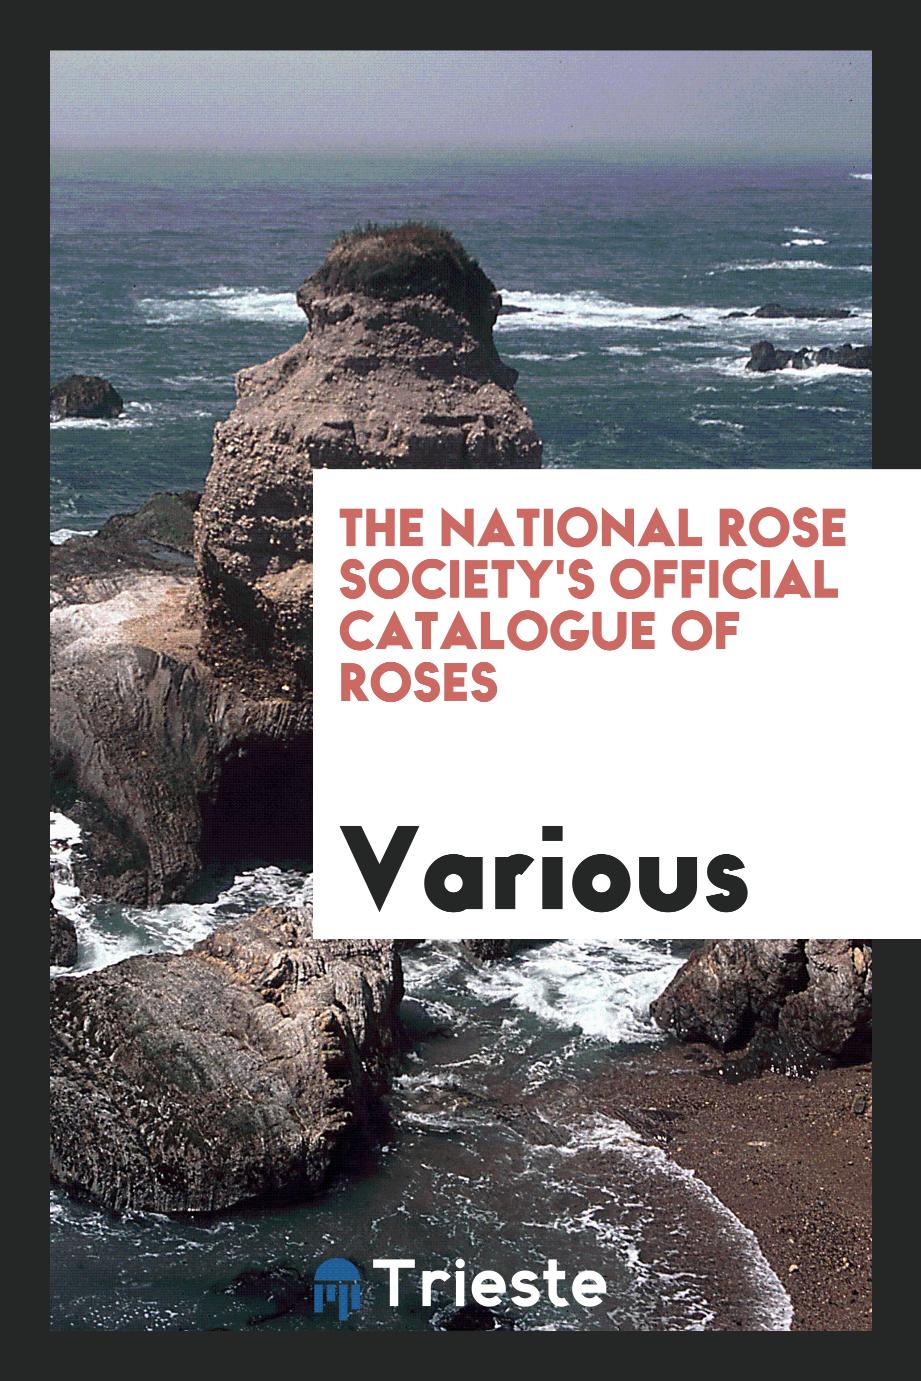 The National Rose Society's Official Catalogue of Roses